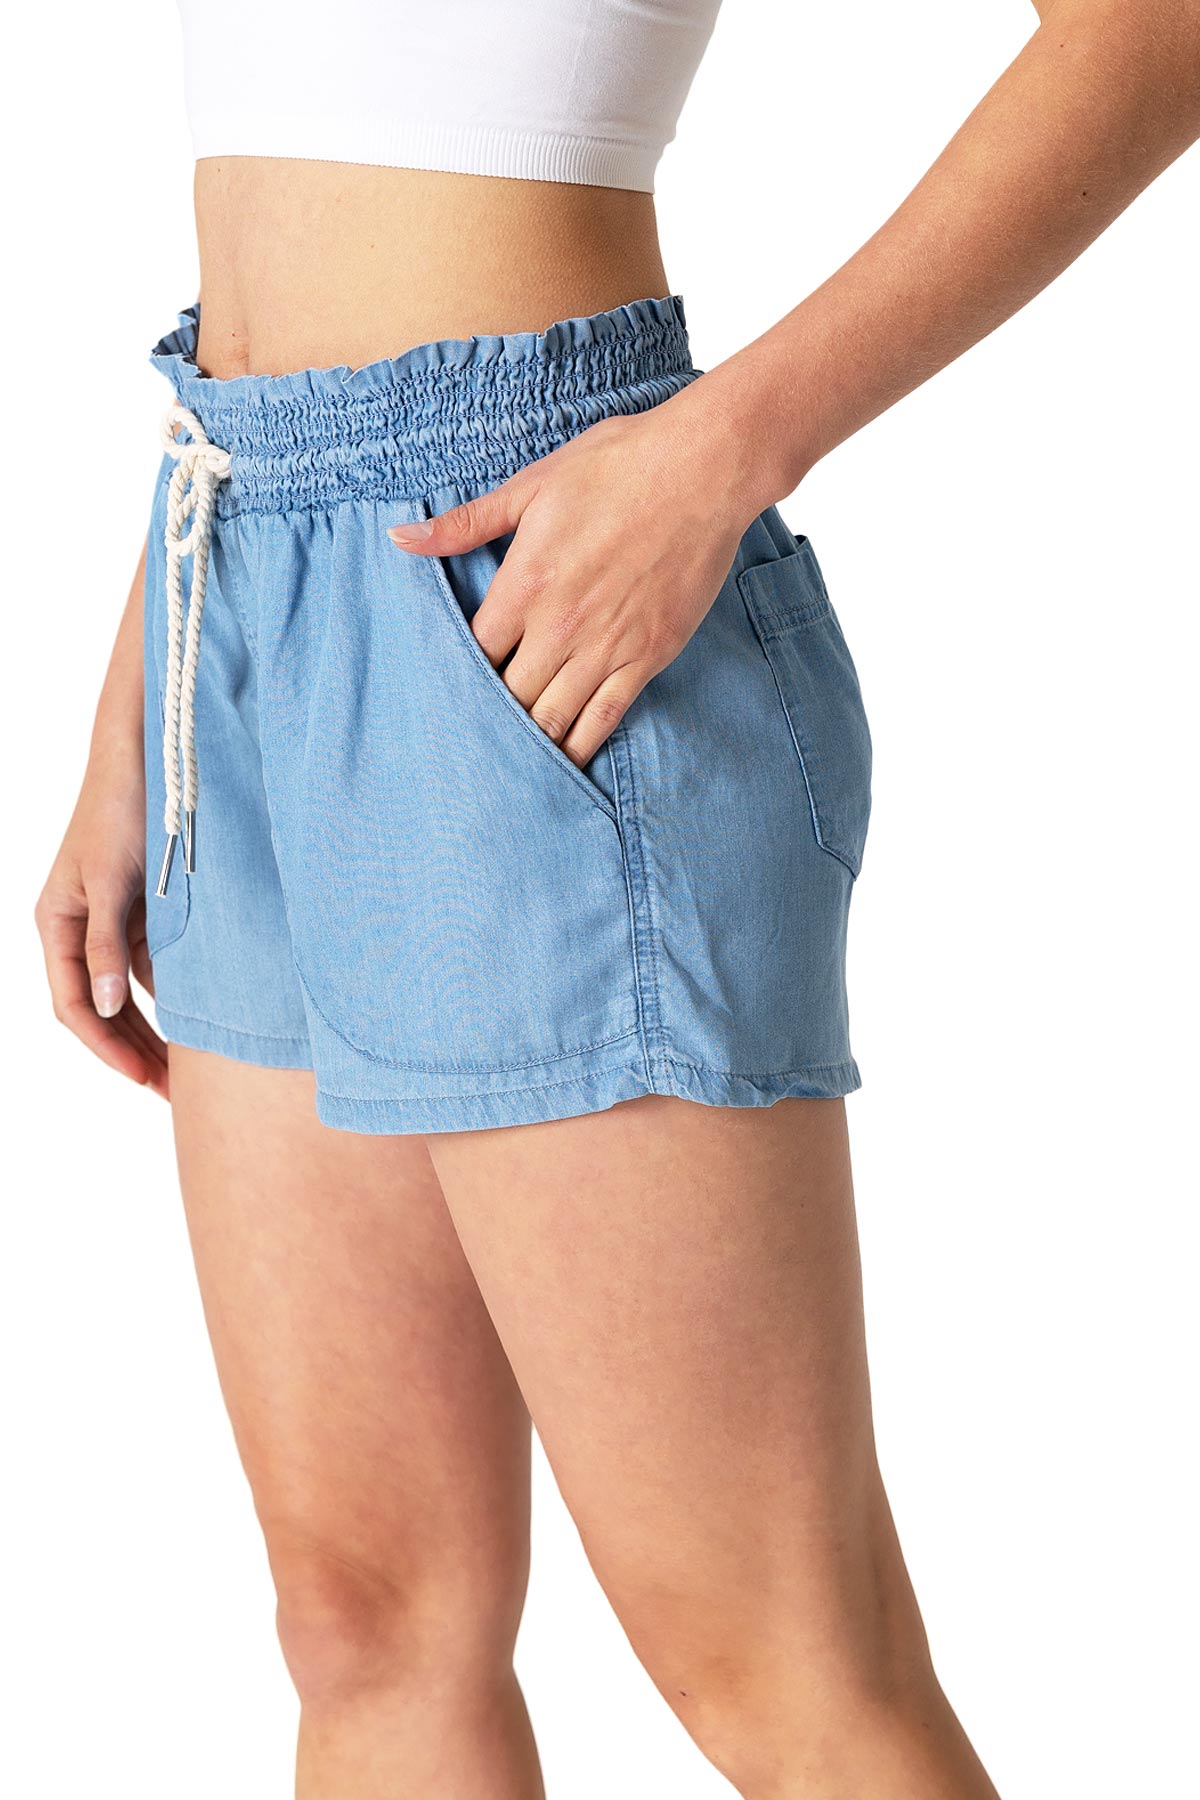 Love To Lounge - Shorts for Women